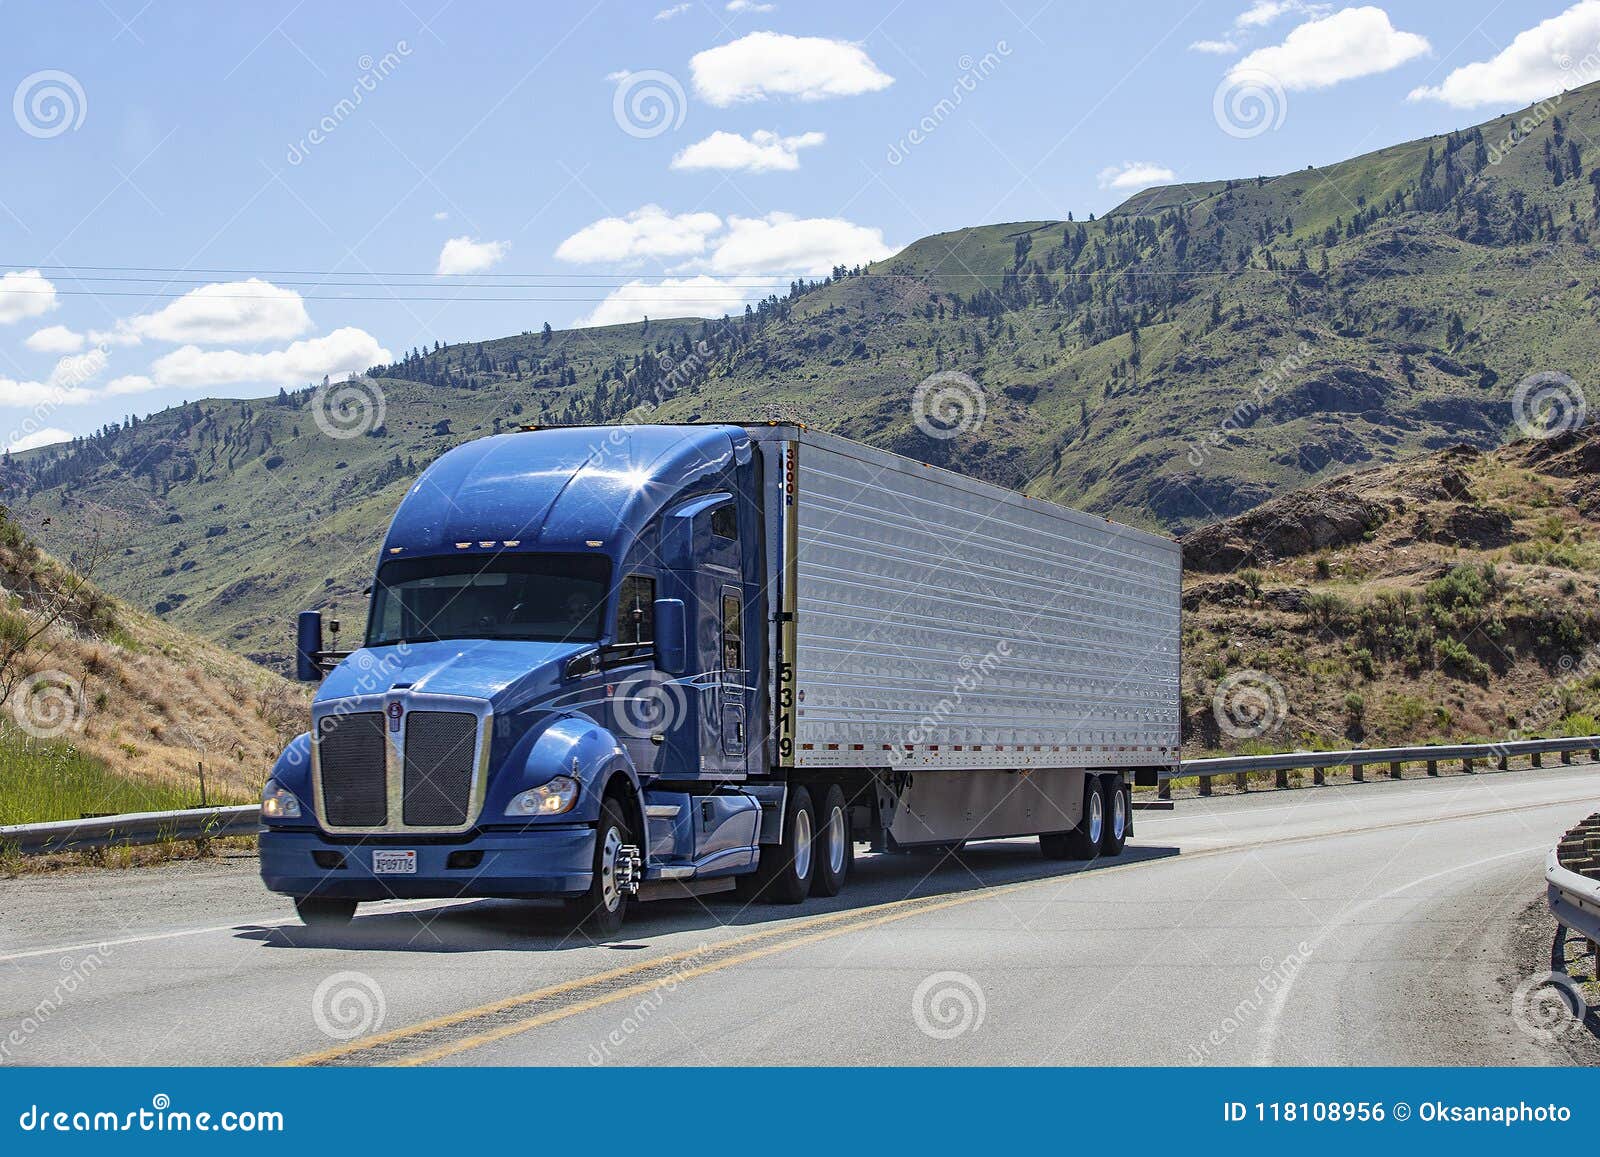 semi truck with trailer driving on highway